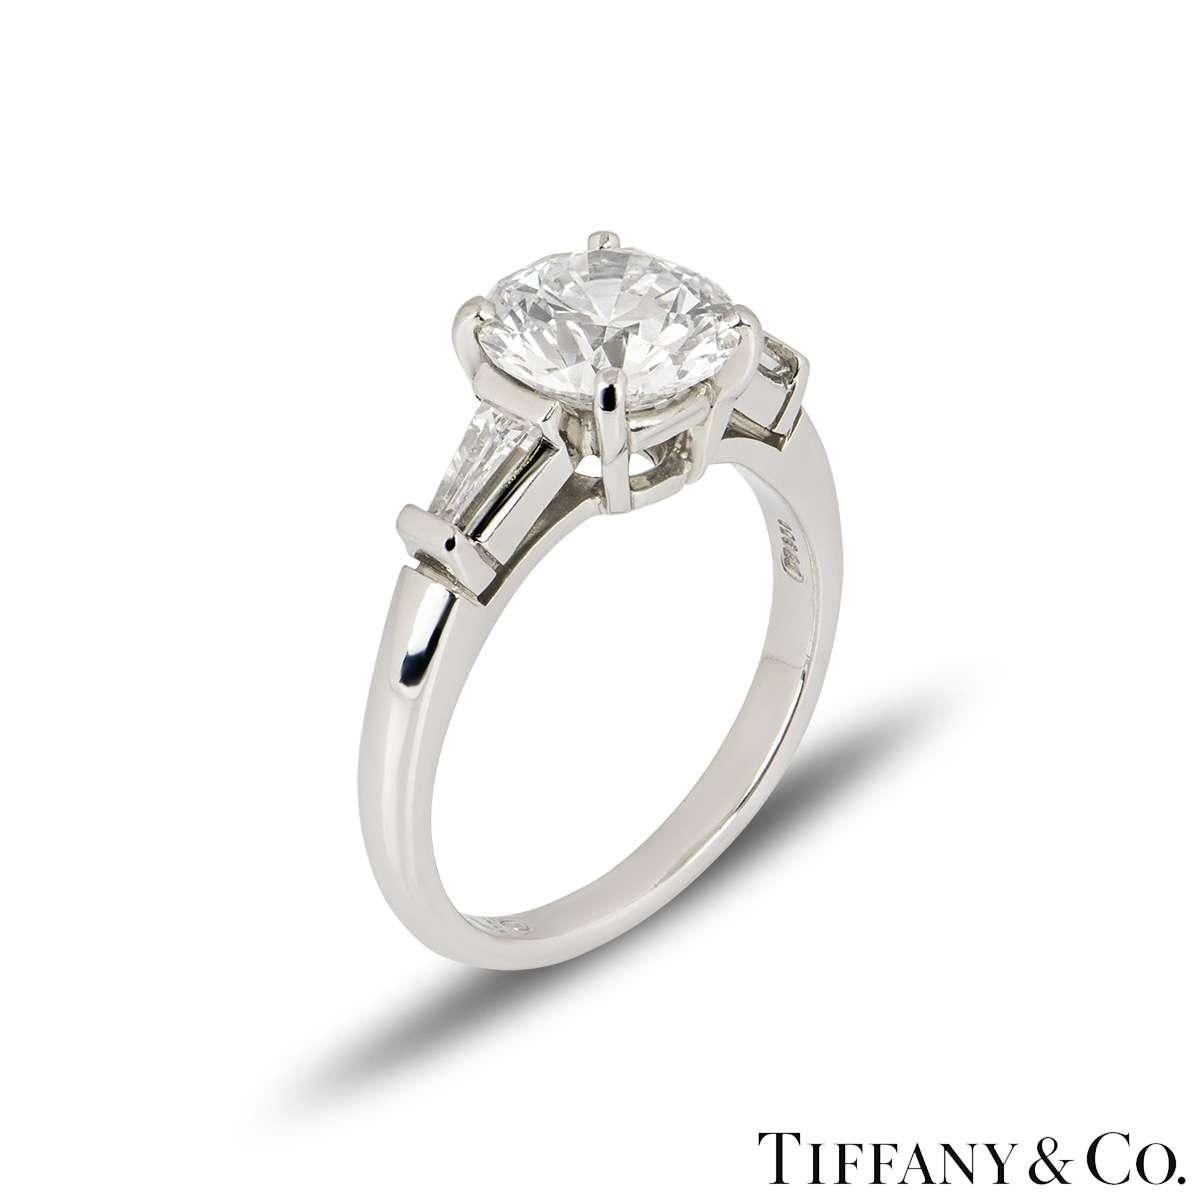 A stunning Tiffany & Co. diamond platinum engagement ring from the Three Stone collection. The ring comprises of a round brilliant cut diamond in a 4 claw setting weighing 2.10ct, E colour and VS1 clarity. Flanked by two tapered baguette cut